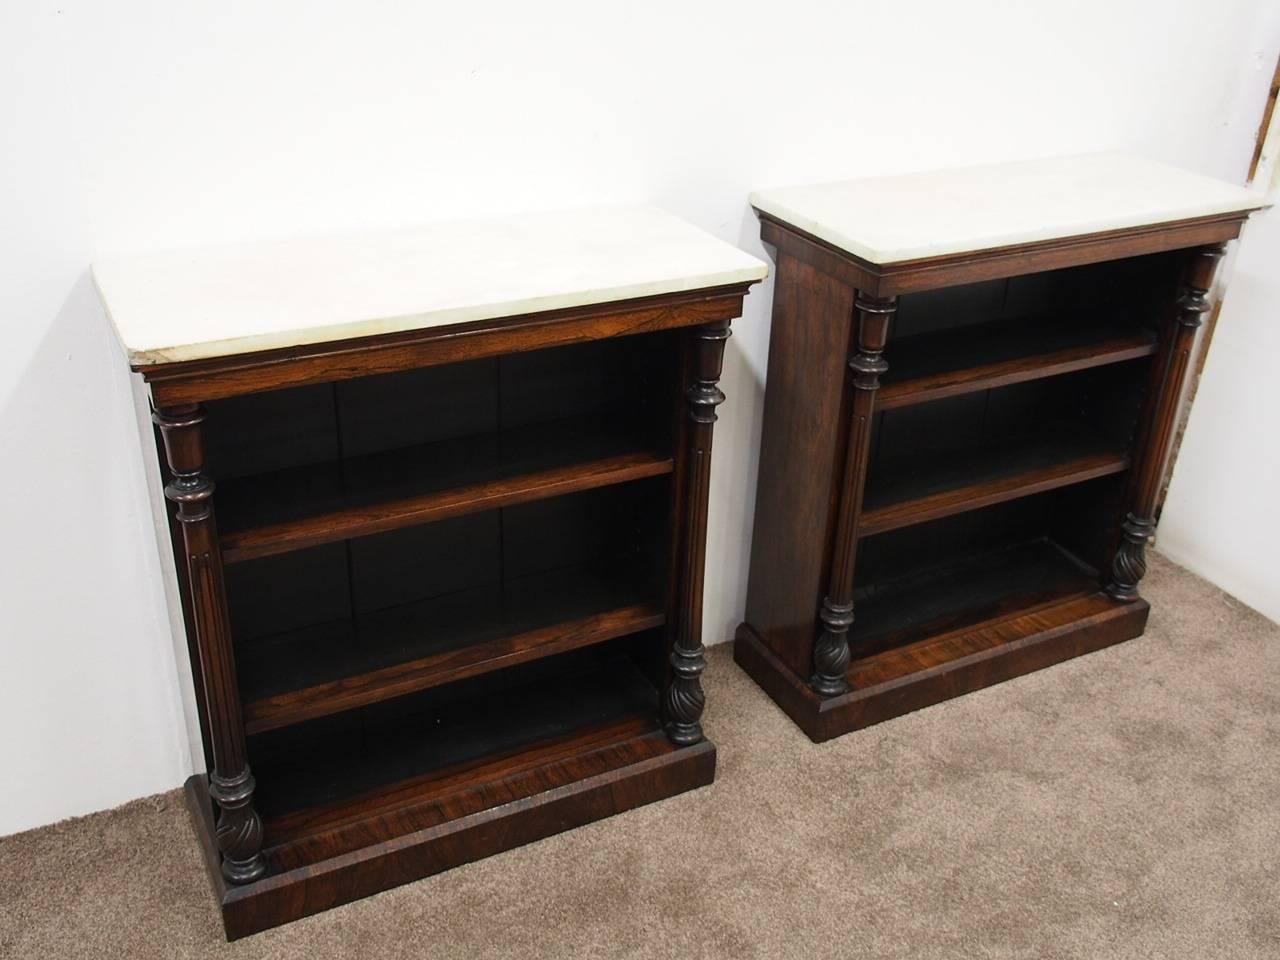 Pair of George IV rosewood and marble-top open bookcases, circa 1820. With two adjustable shelves in a mixture of mahogany and rosewood with columns either side featuring an unusual pattern and ring turns. With rosewood gables and to the base a